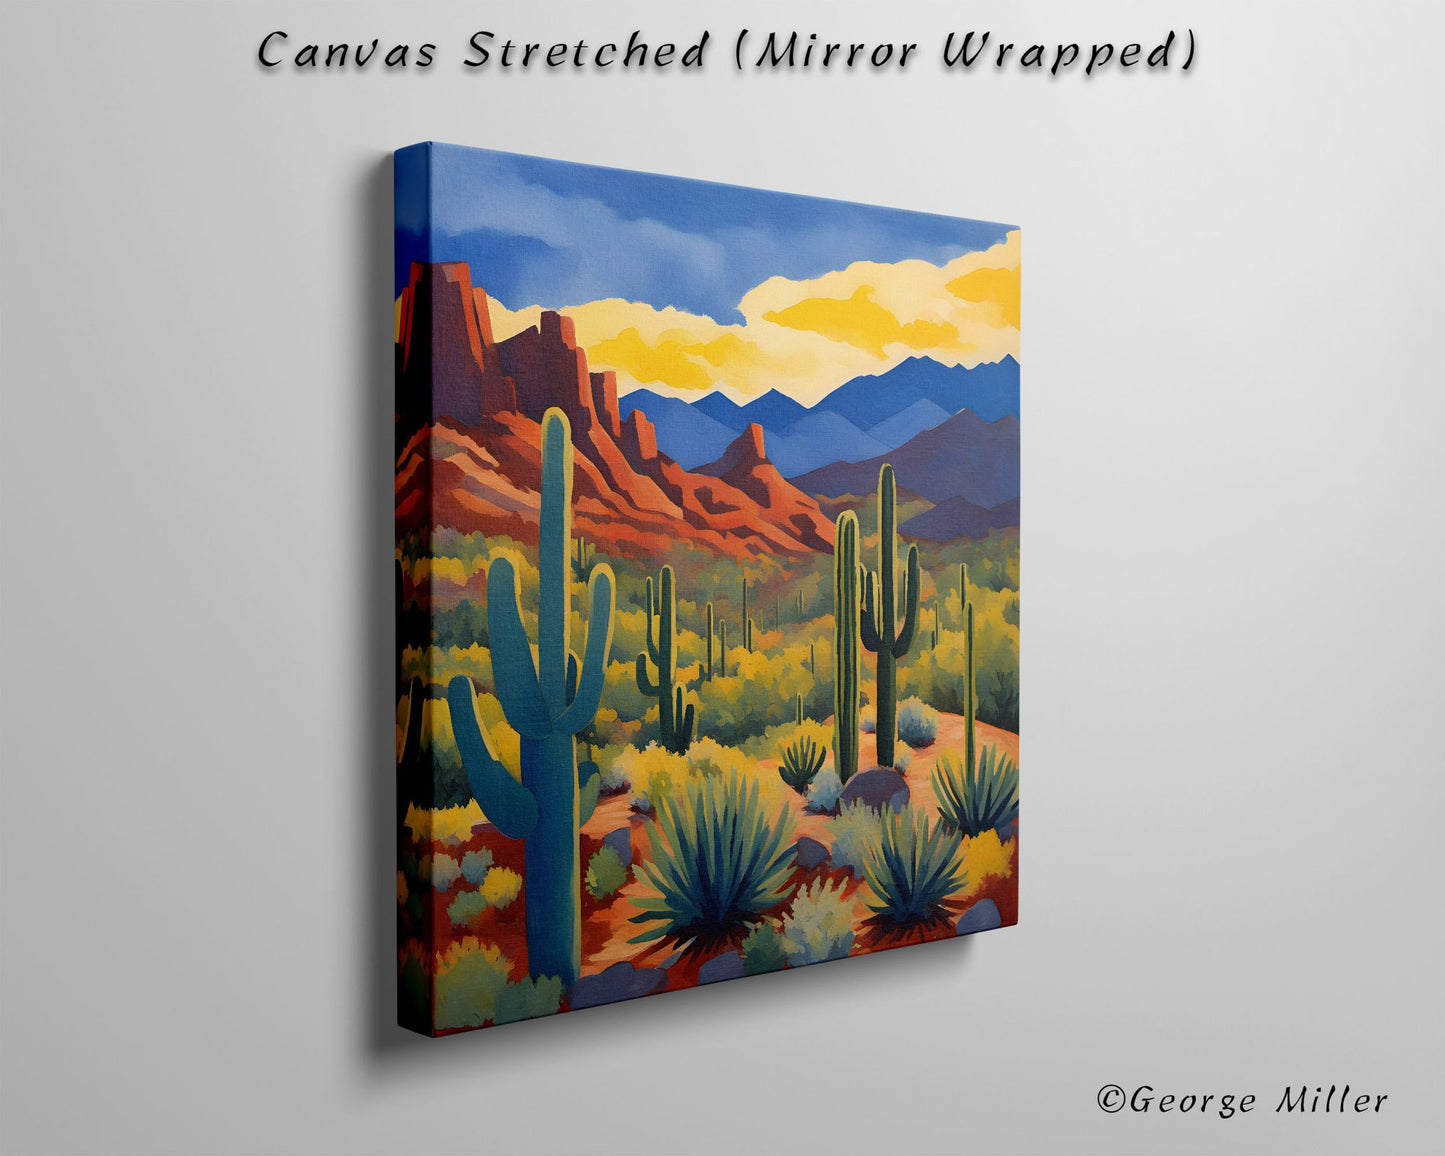 Alley View Overlook In Tucson Mountain District, Saguaro National Park Usa Travel Print, Print, Travel Poster Print, Square Canvas Print